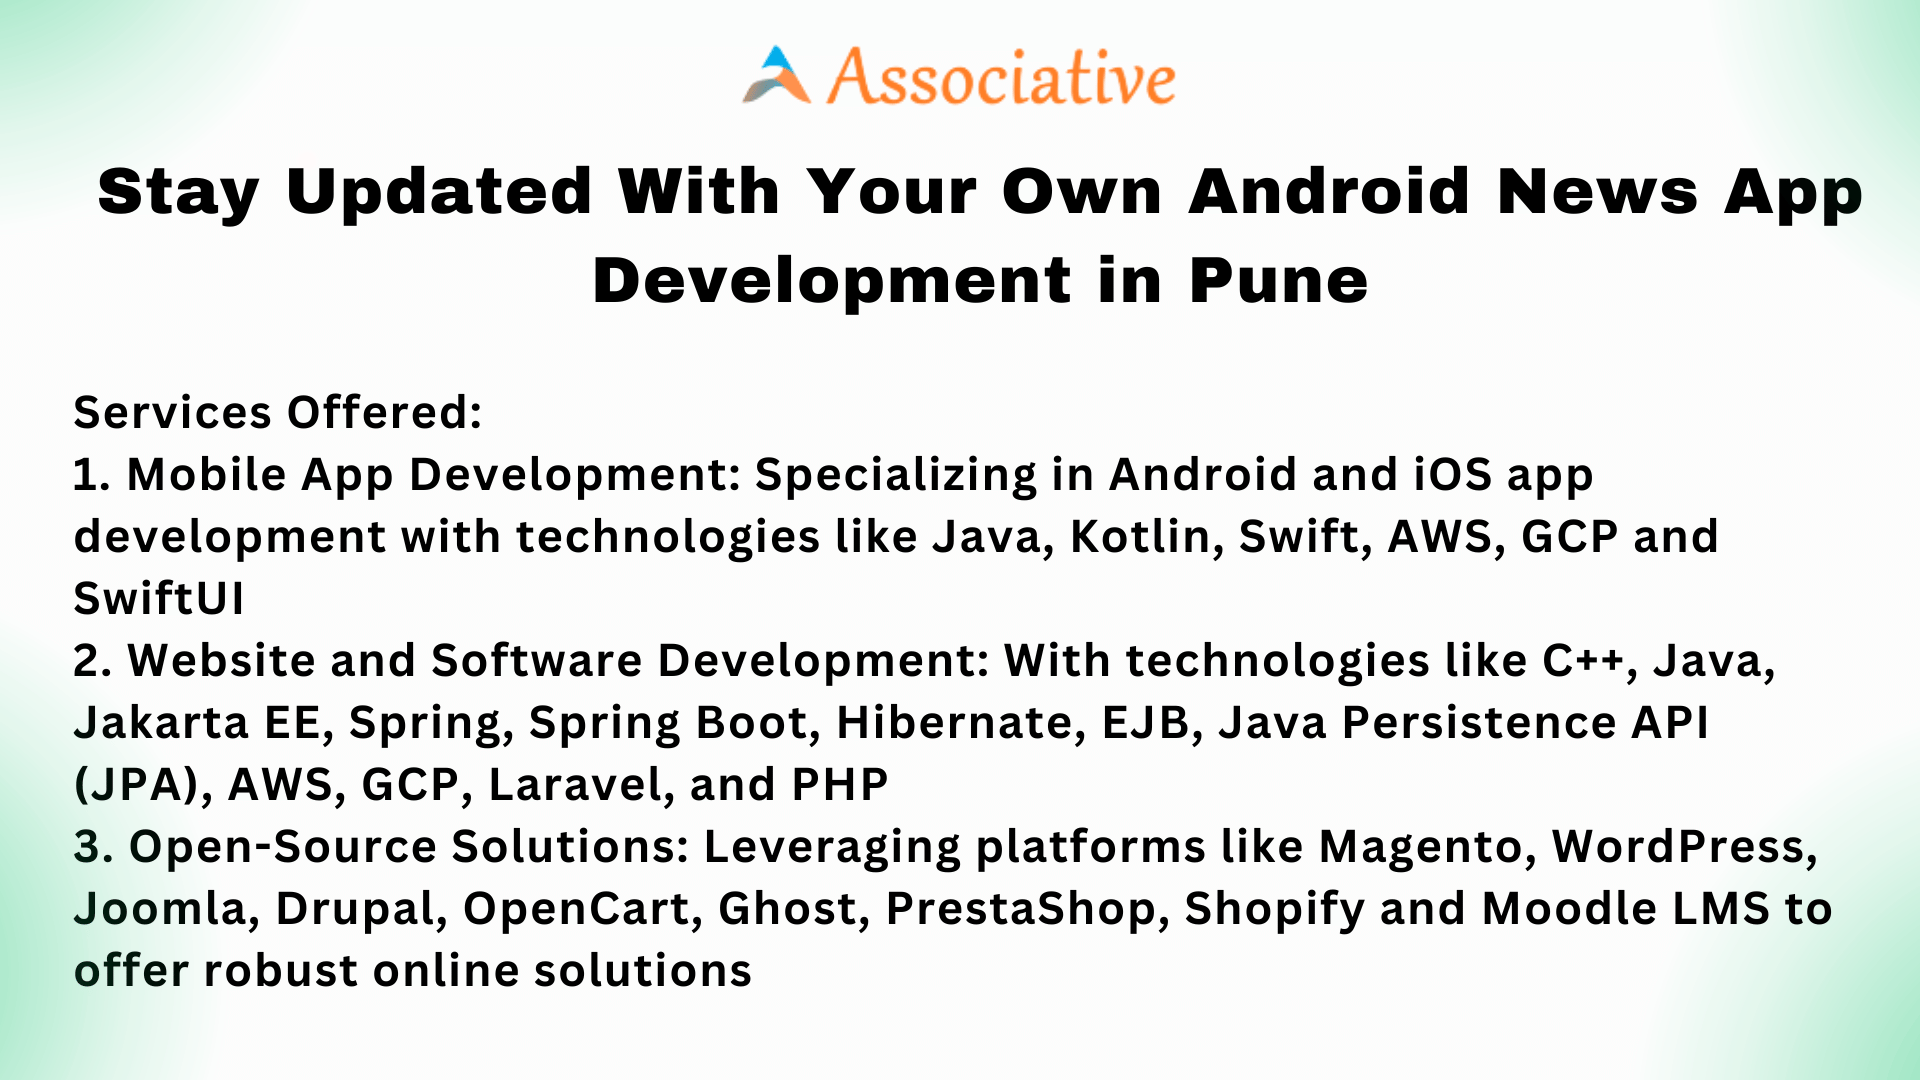 Stay Updated With Your Own Android News App Development in Pune